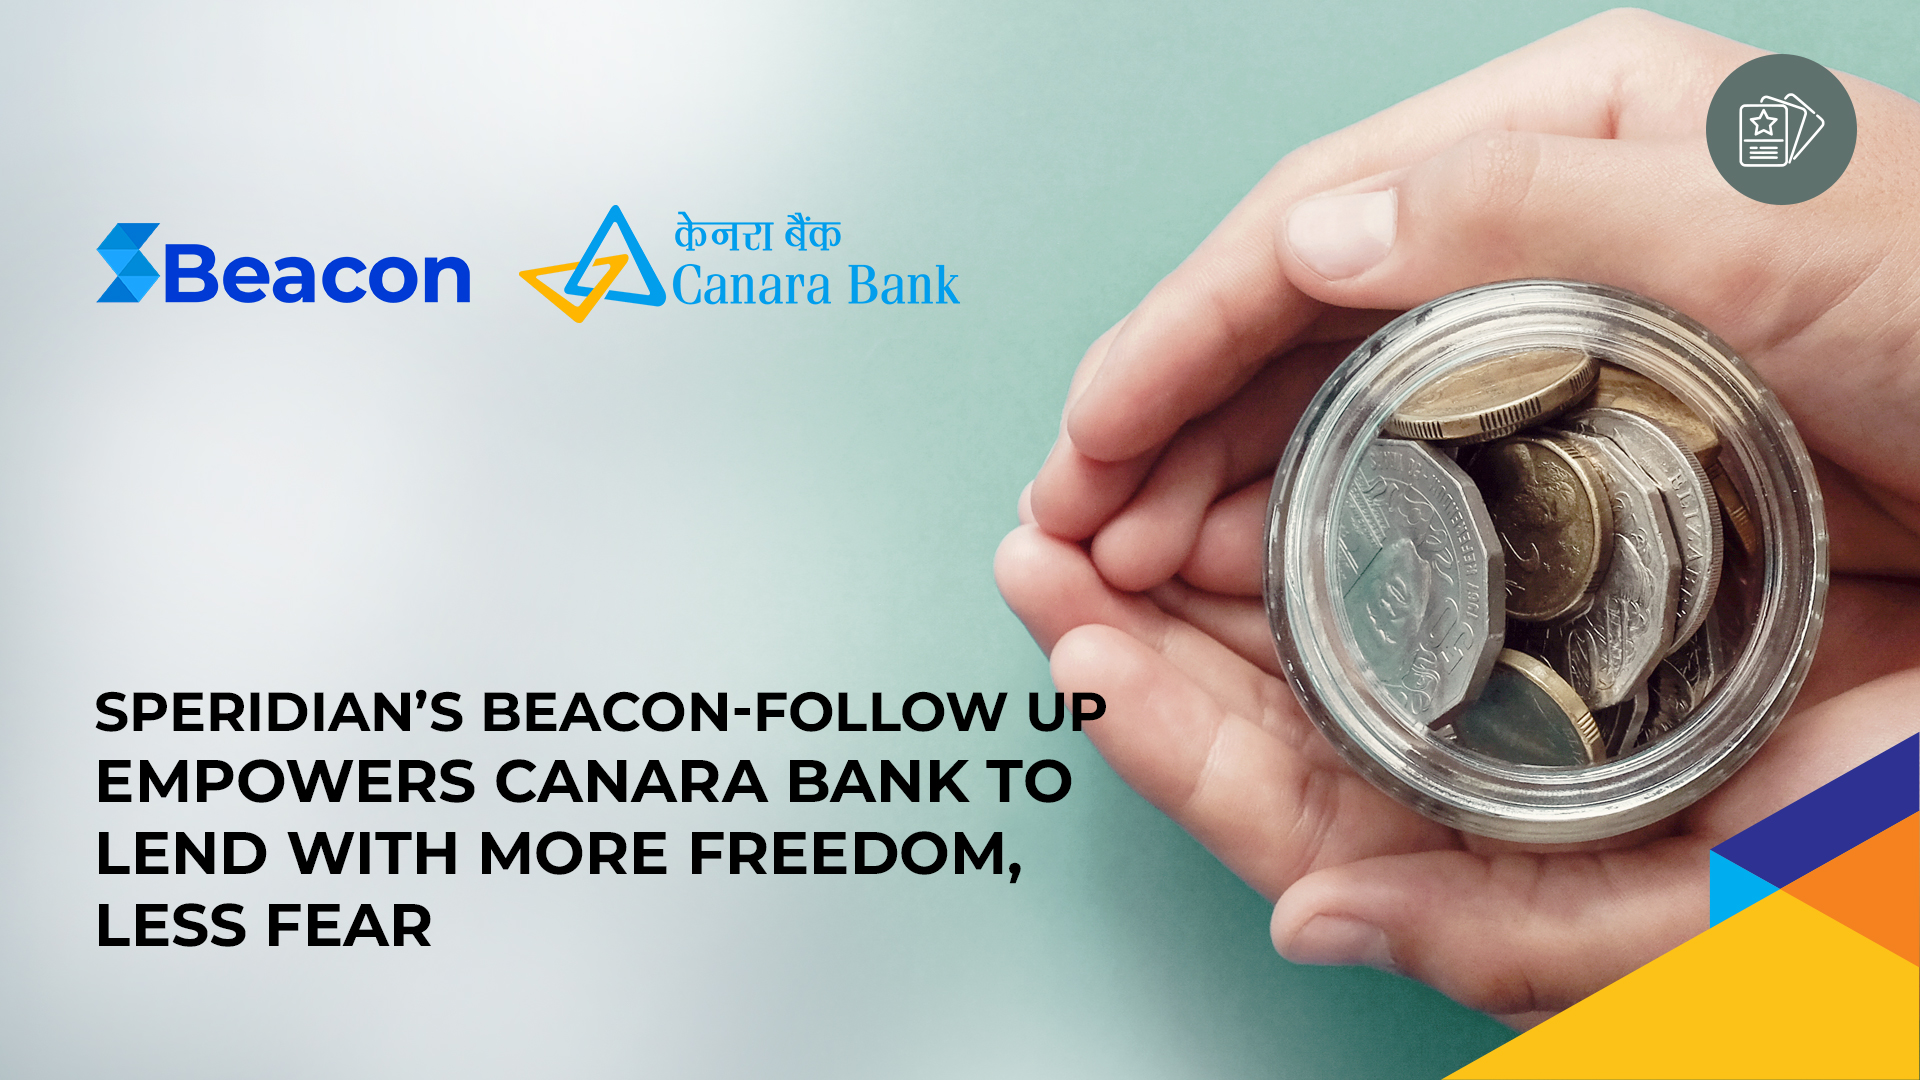 Speridian’s BEACON Follow-Up Empowers Canara Bank to Lend Wth More Freedom, Less Fear